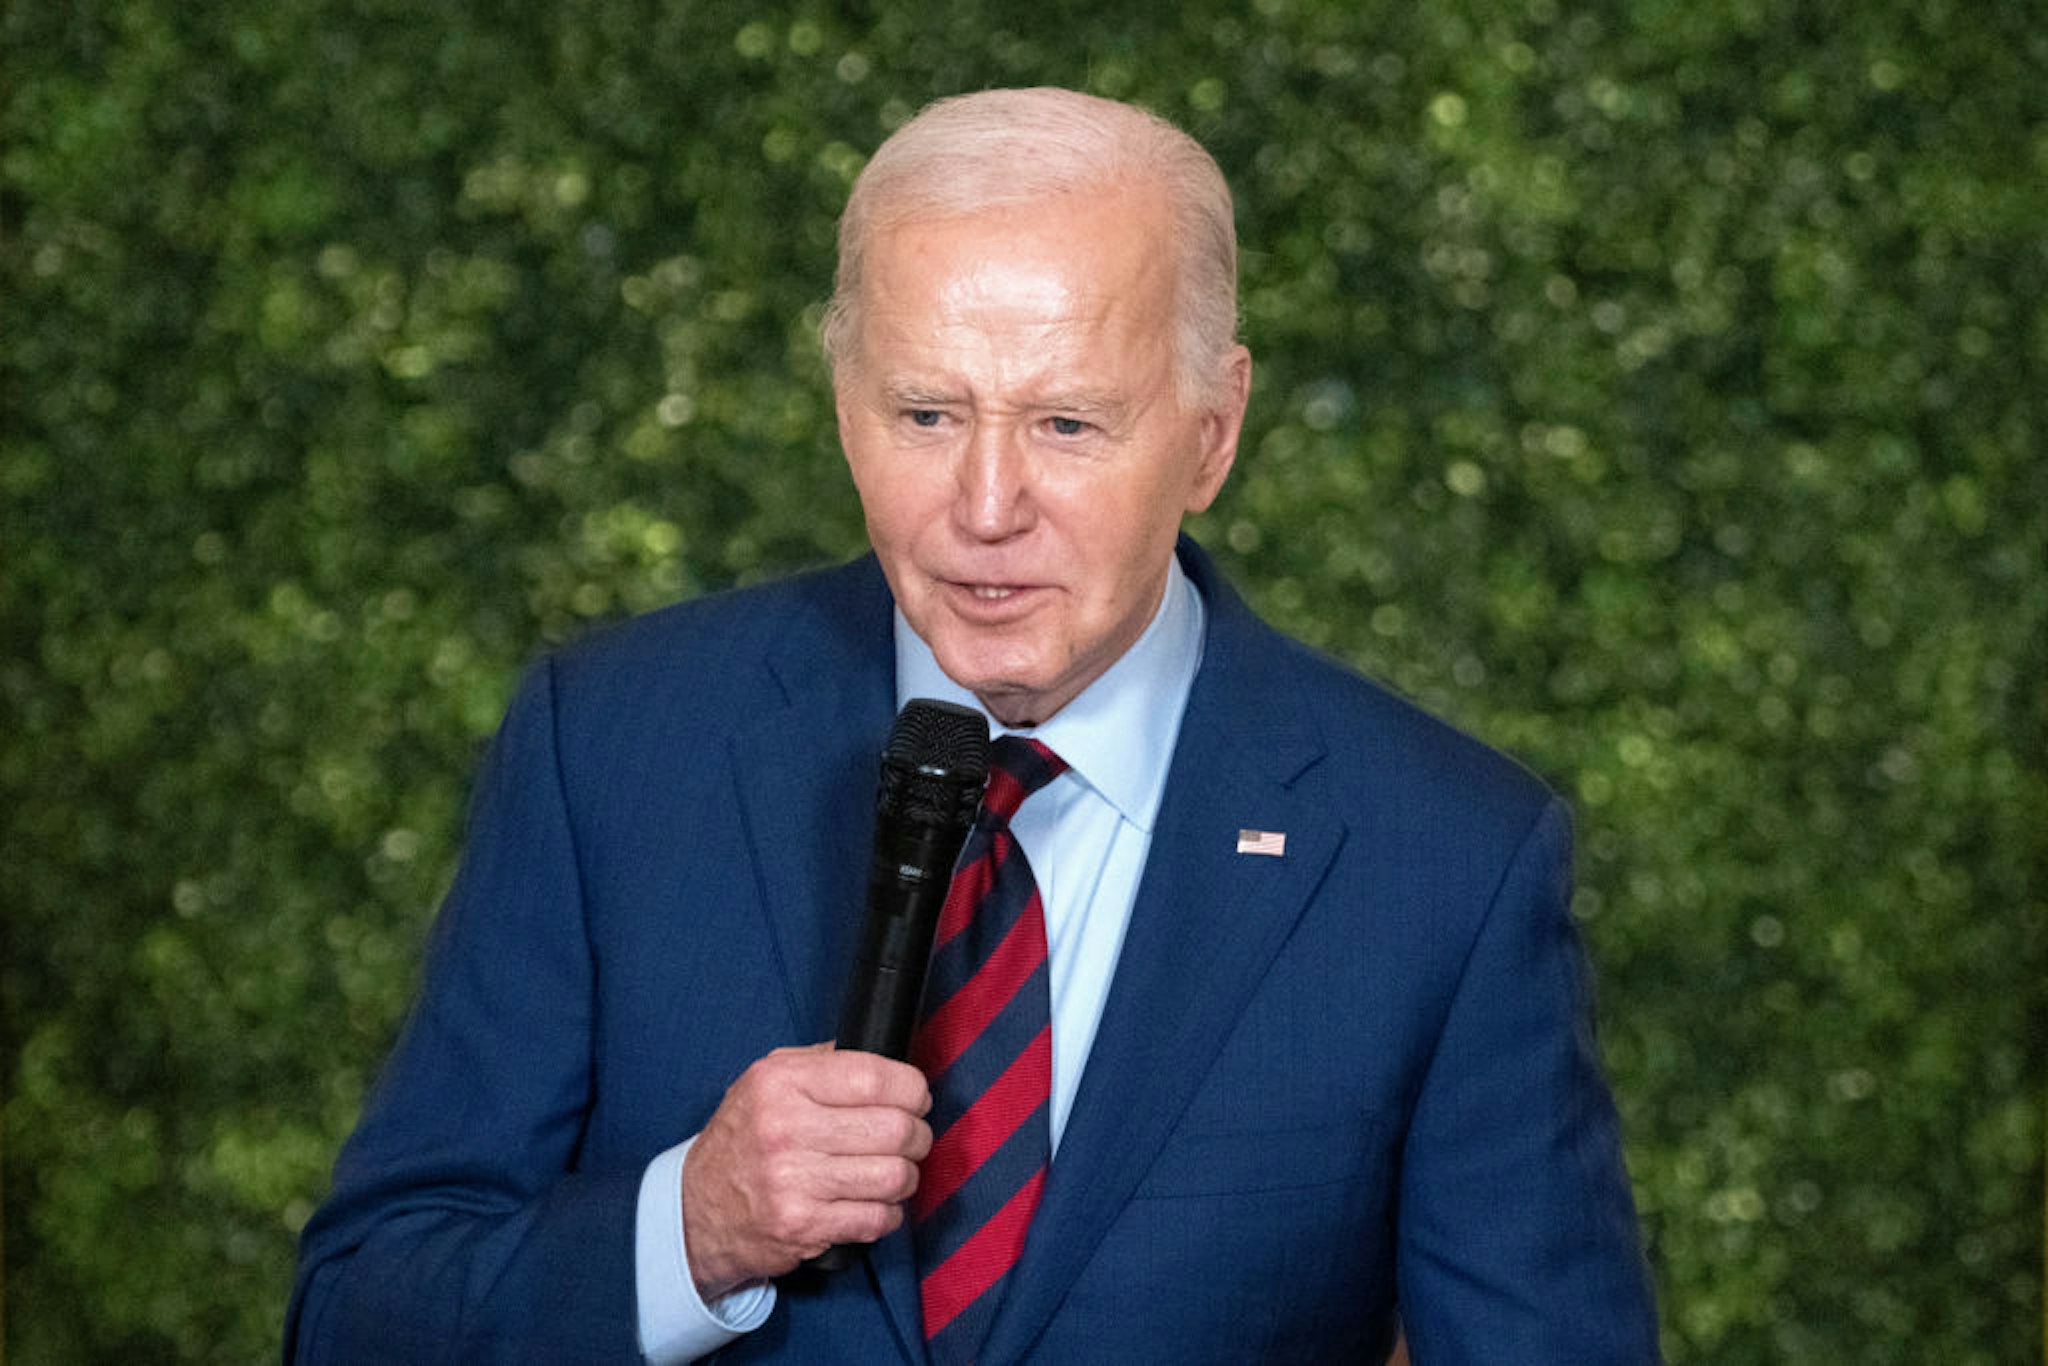 US President Joe Biden speaks during the "Teachers of the Year" state dinner in the East Room of the White House in Washington, DC, US, on Thursday, May 2, 2024. The event is meant to honor the 2024 National Teacher of the Year, as well as the State Teachers of the Year from across the country.